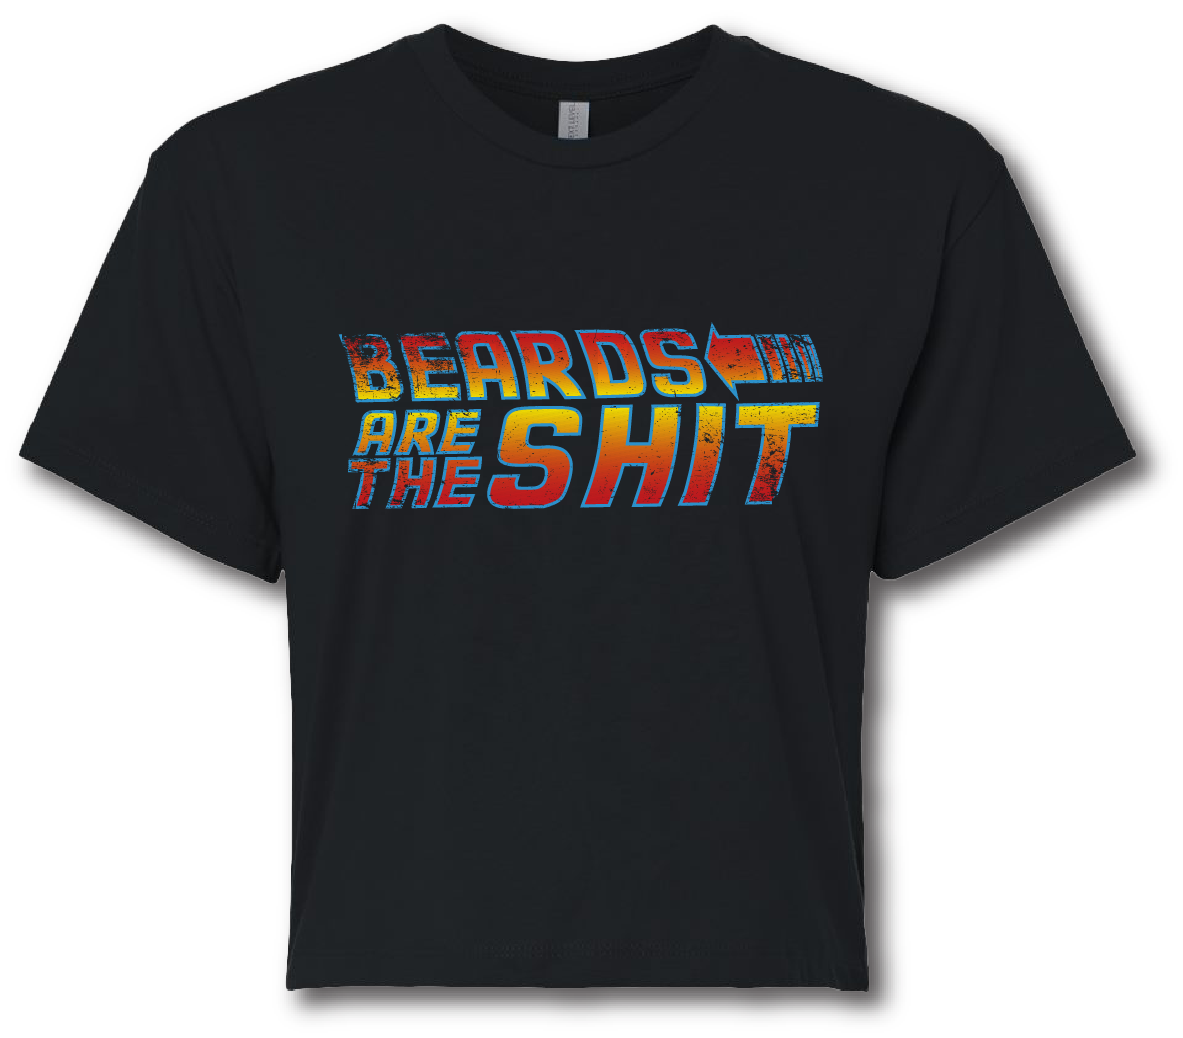 Beards are the Shit Short Sleeve T-shirt